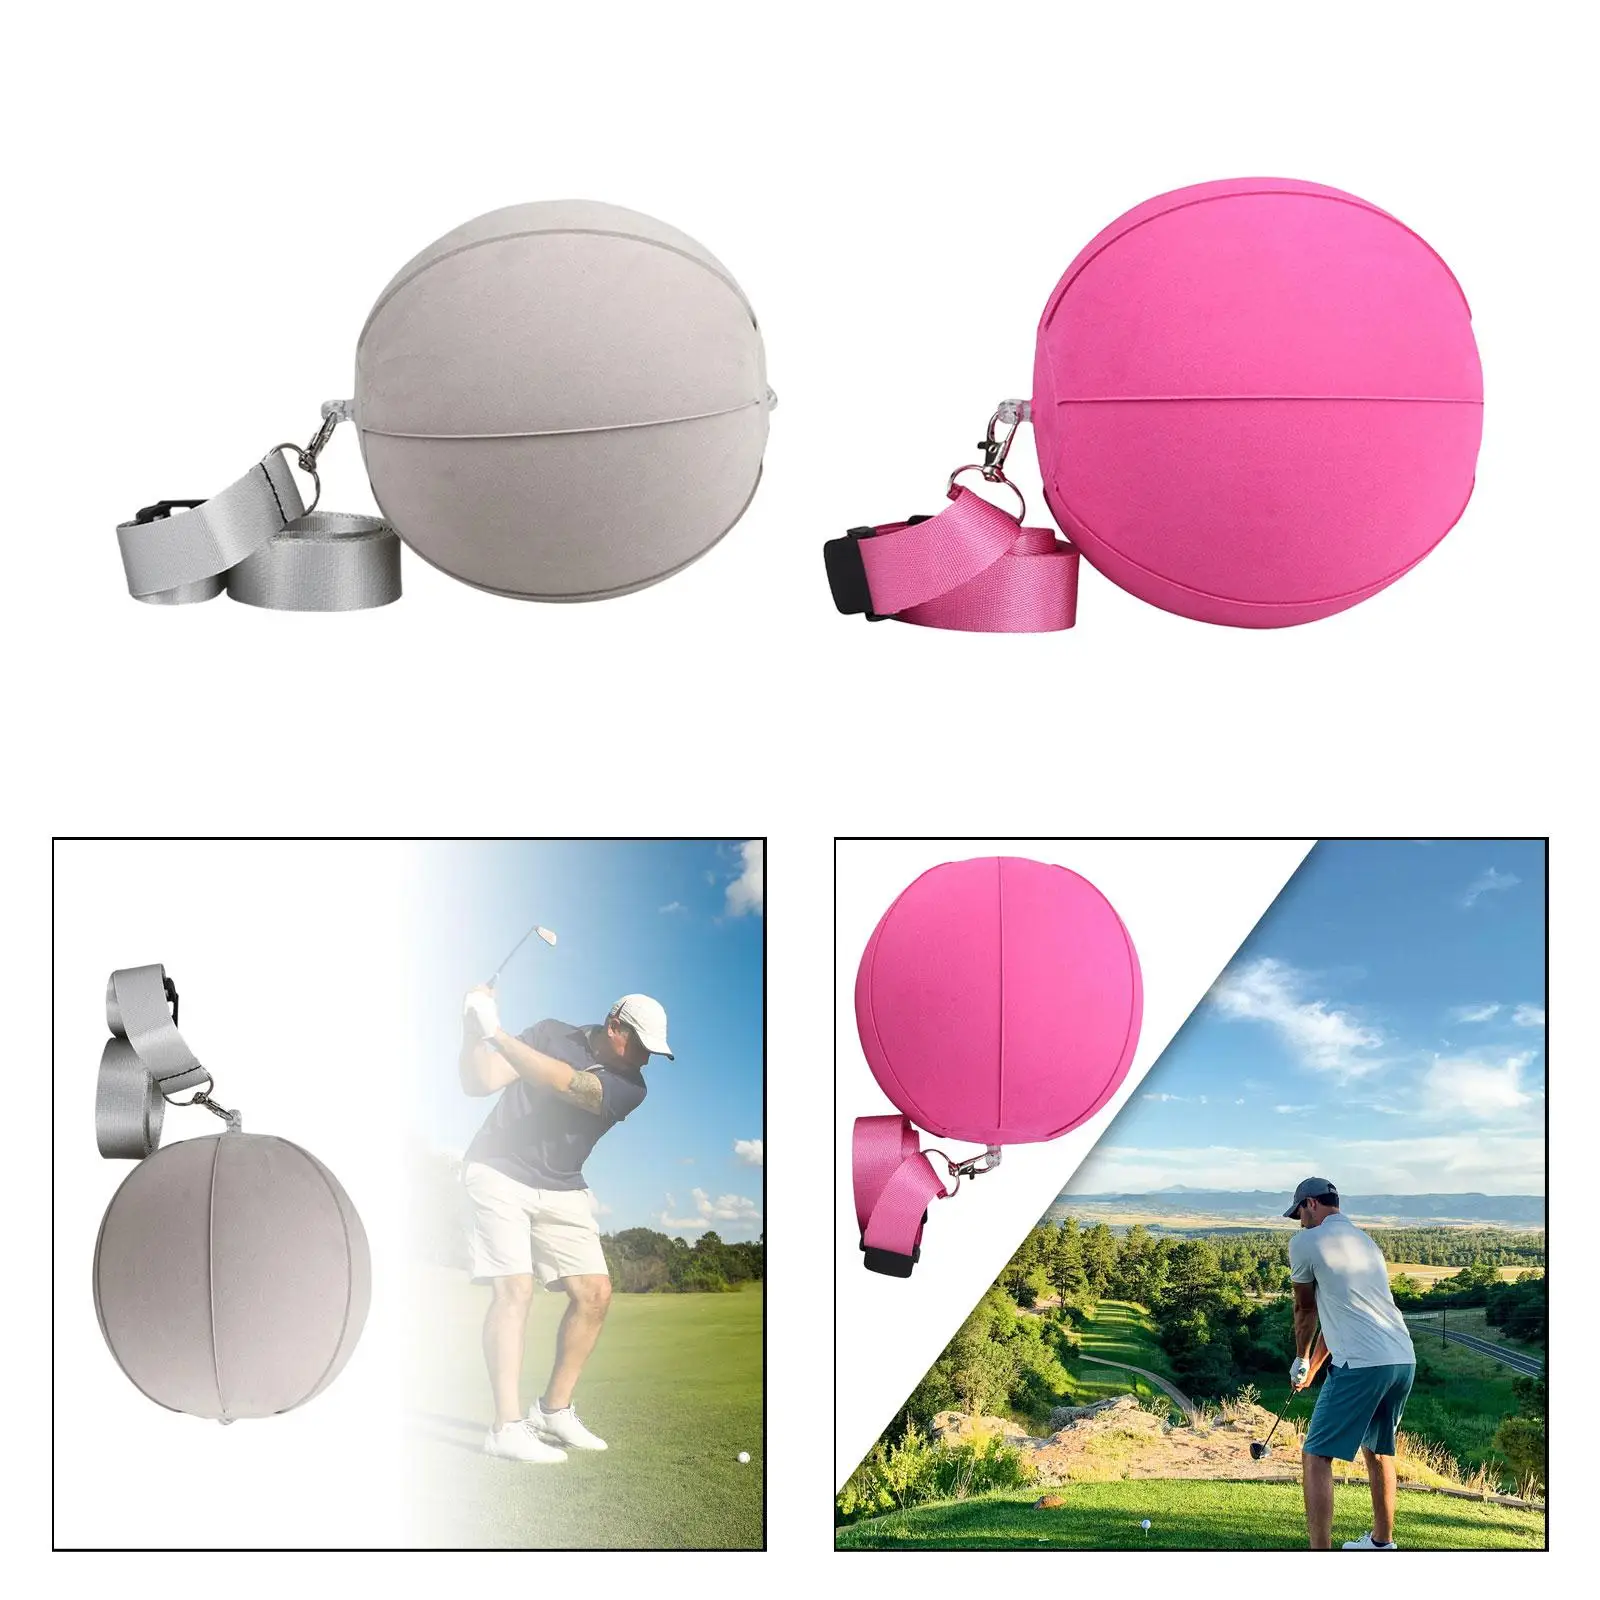 Golf Smart Ball Teaching Professional Arm Motion Guide Swing Assist Posture